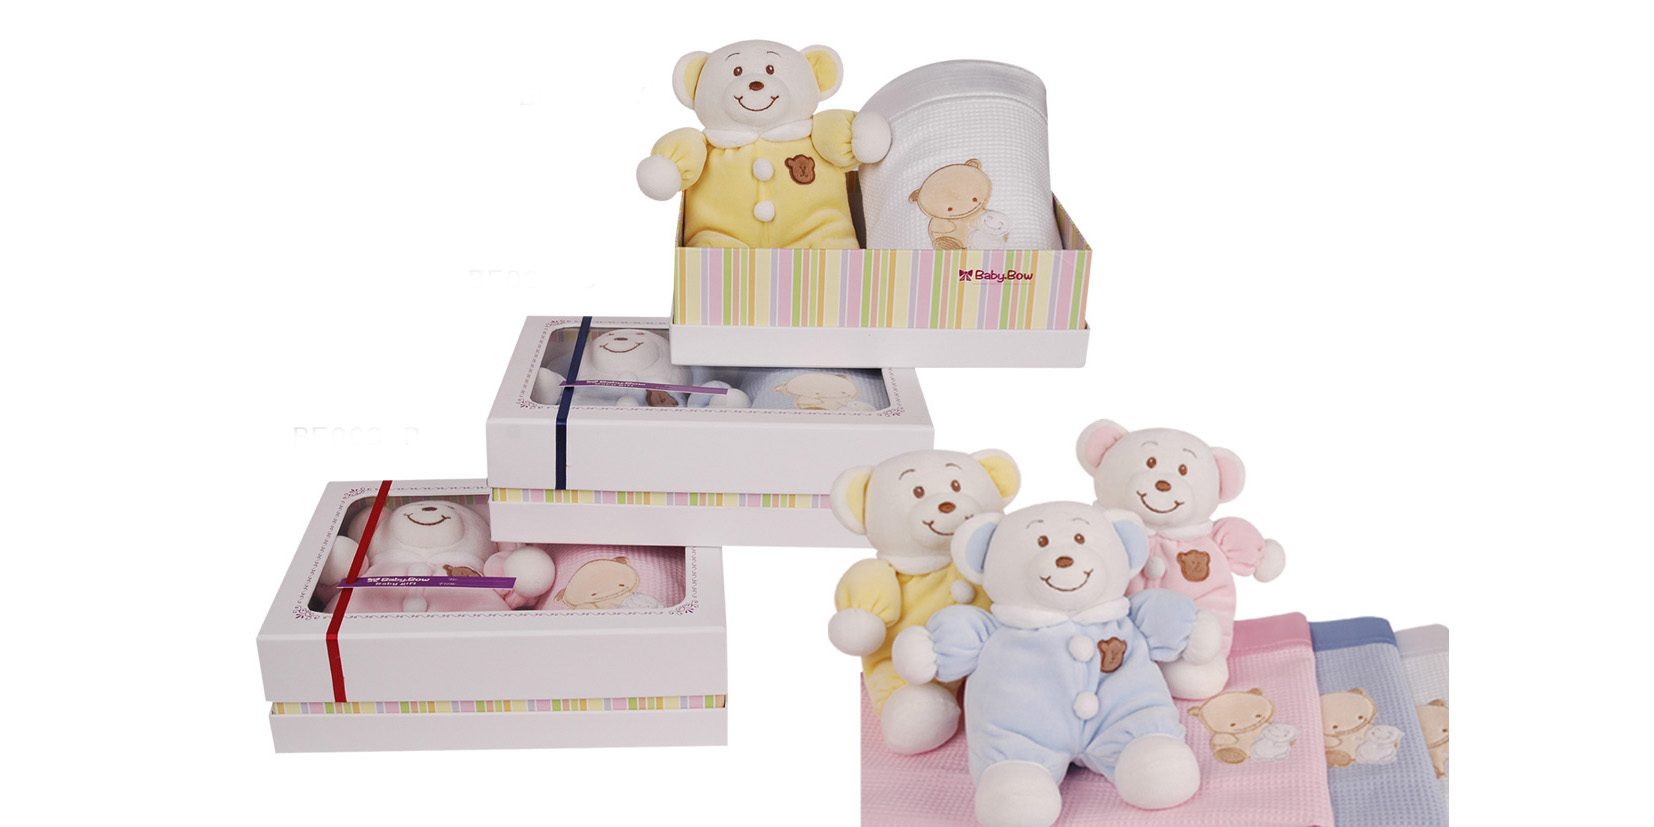 http://www.babybow.pl/upload/products/product_312.jpg